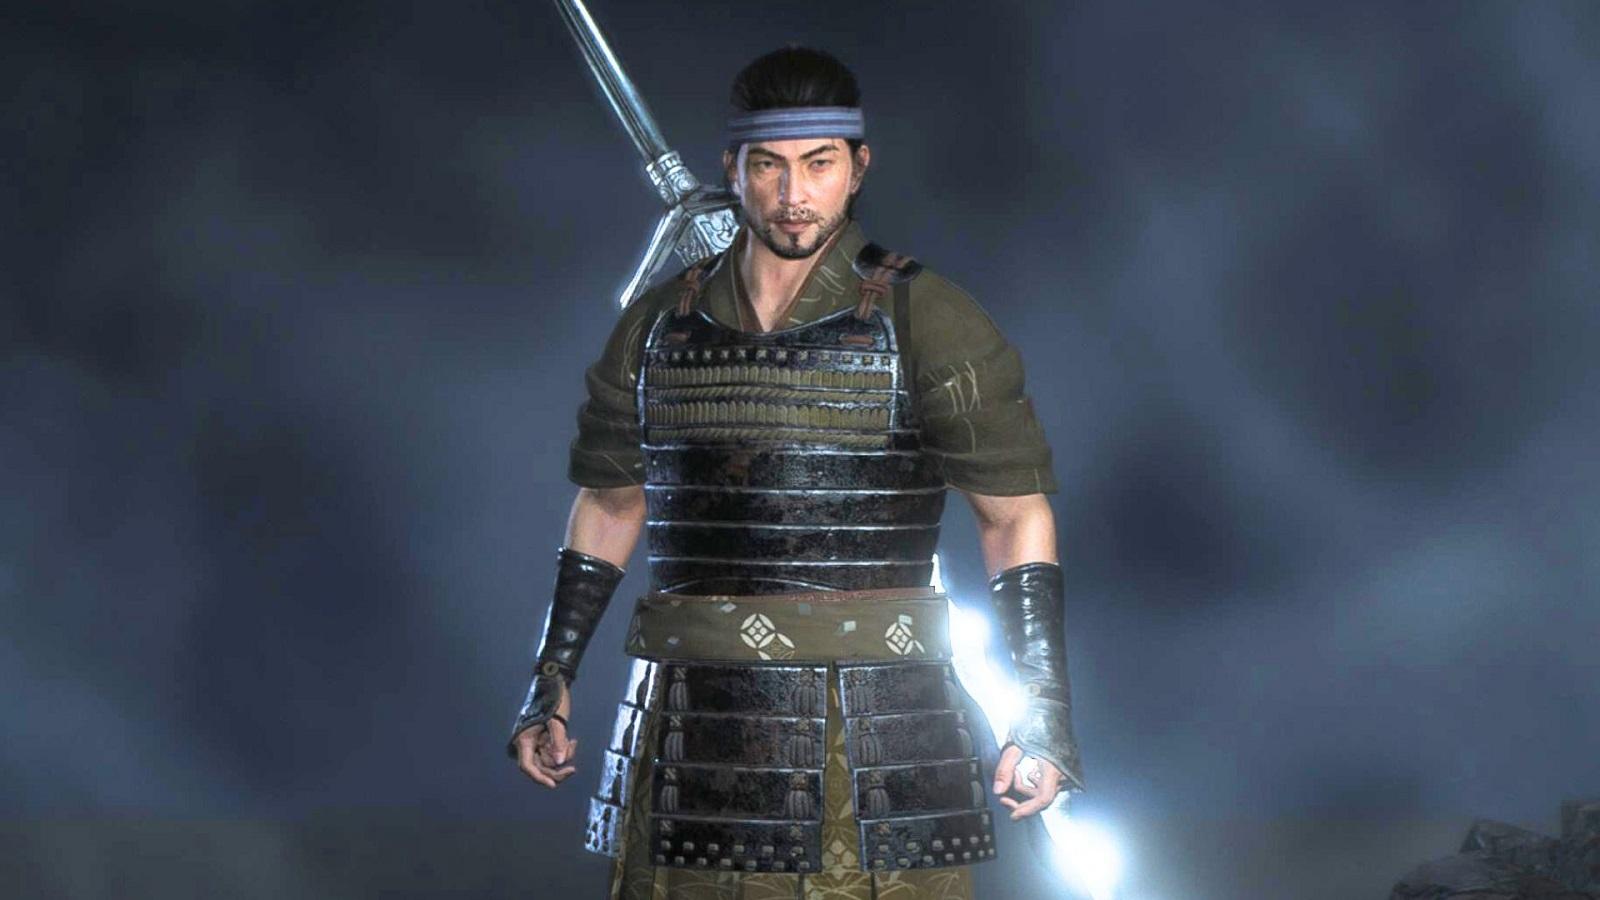 Rise of the Ronin character